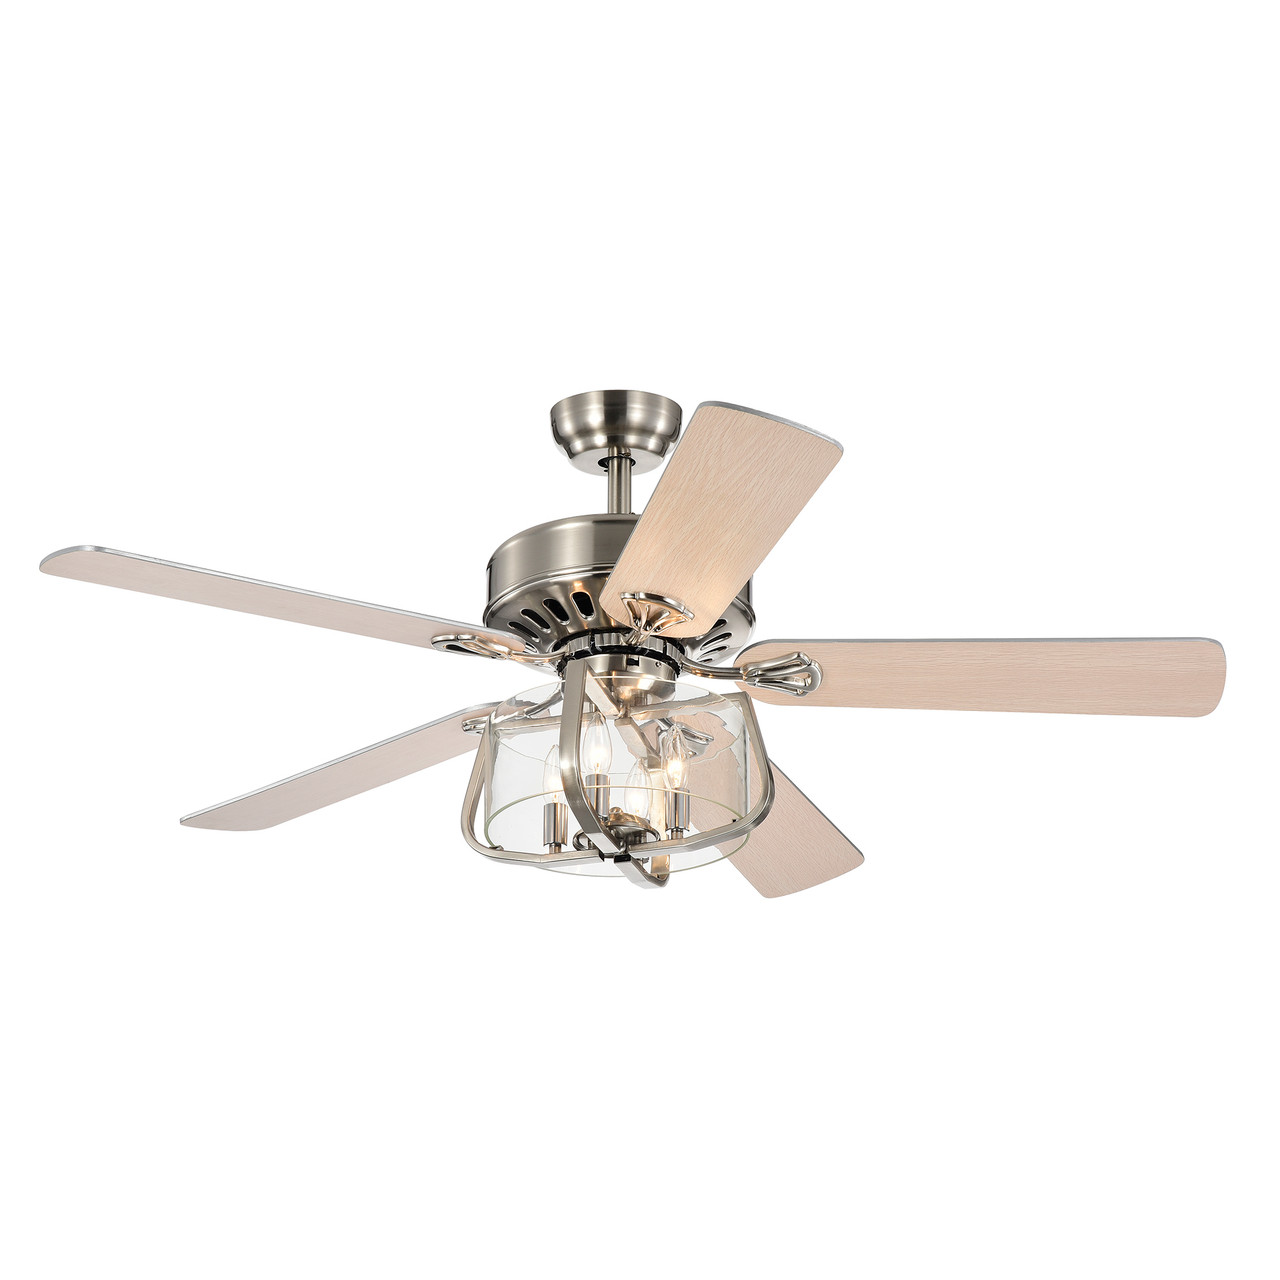 WAREHOUSE OF TIFFANY'S CFL-8428REMO/SN Mari 52 in. 4-Light Indoor Silver Finish Remote Controlled Ceiling Fan with Light Kit